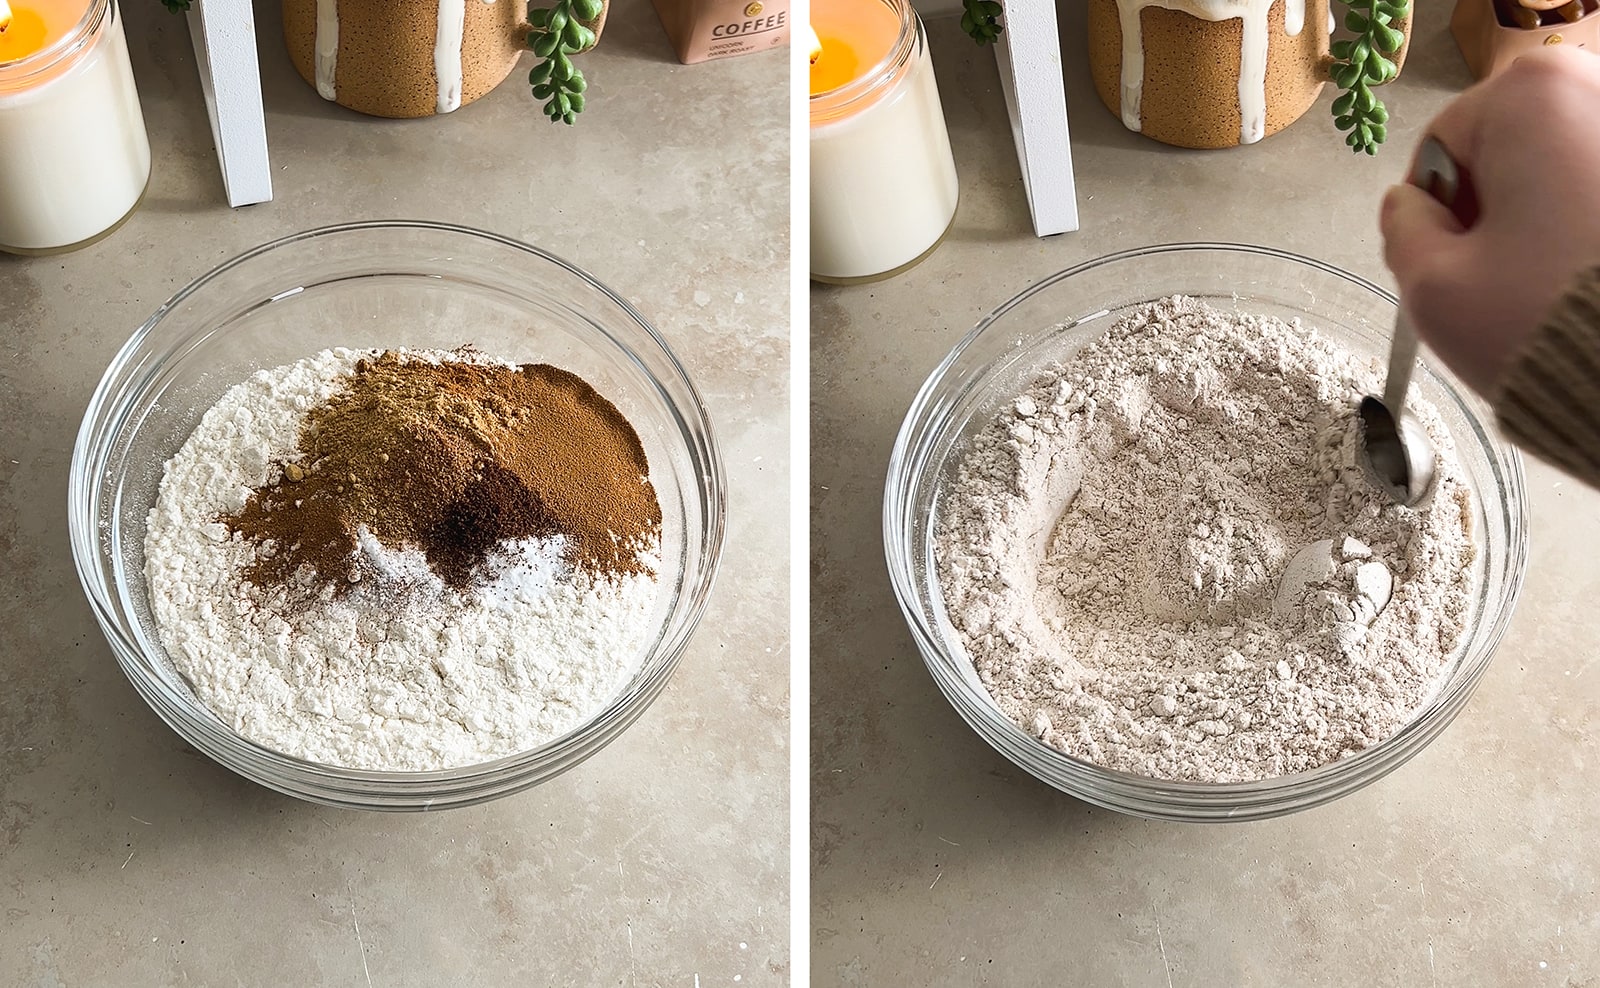 Left to right: dry ingredients in a bowl, stirring dry ingredients in a bowl.